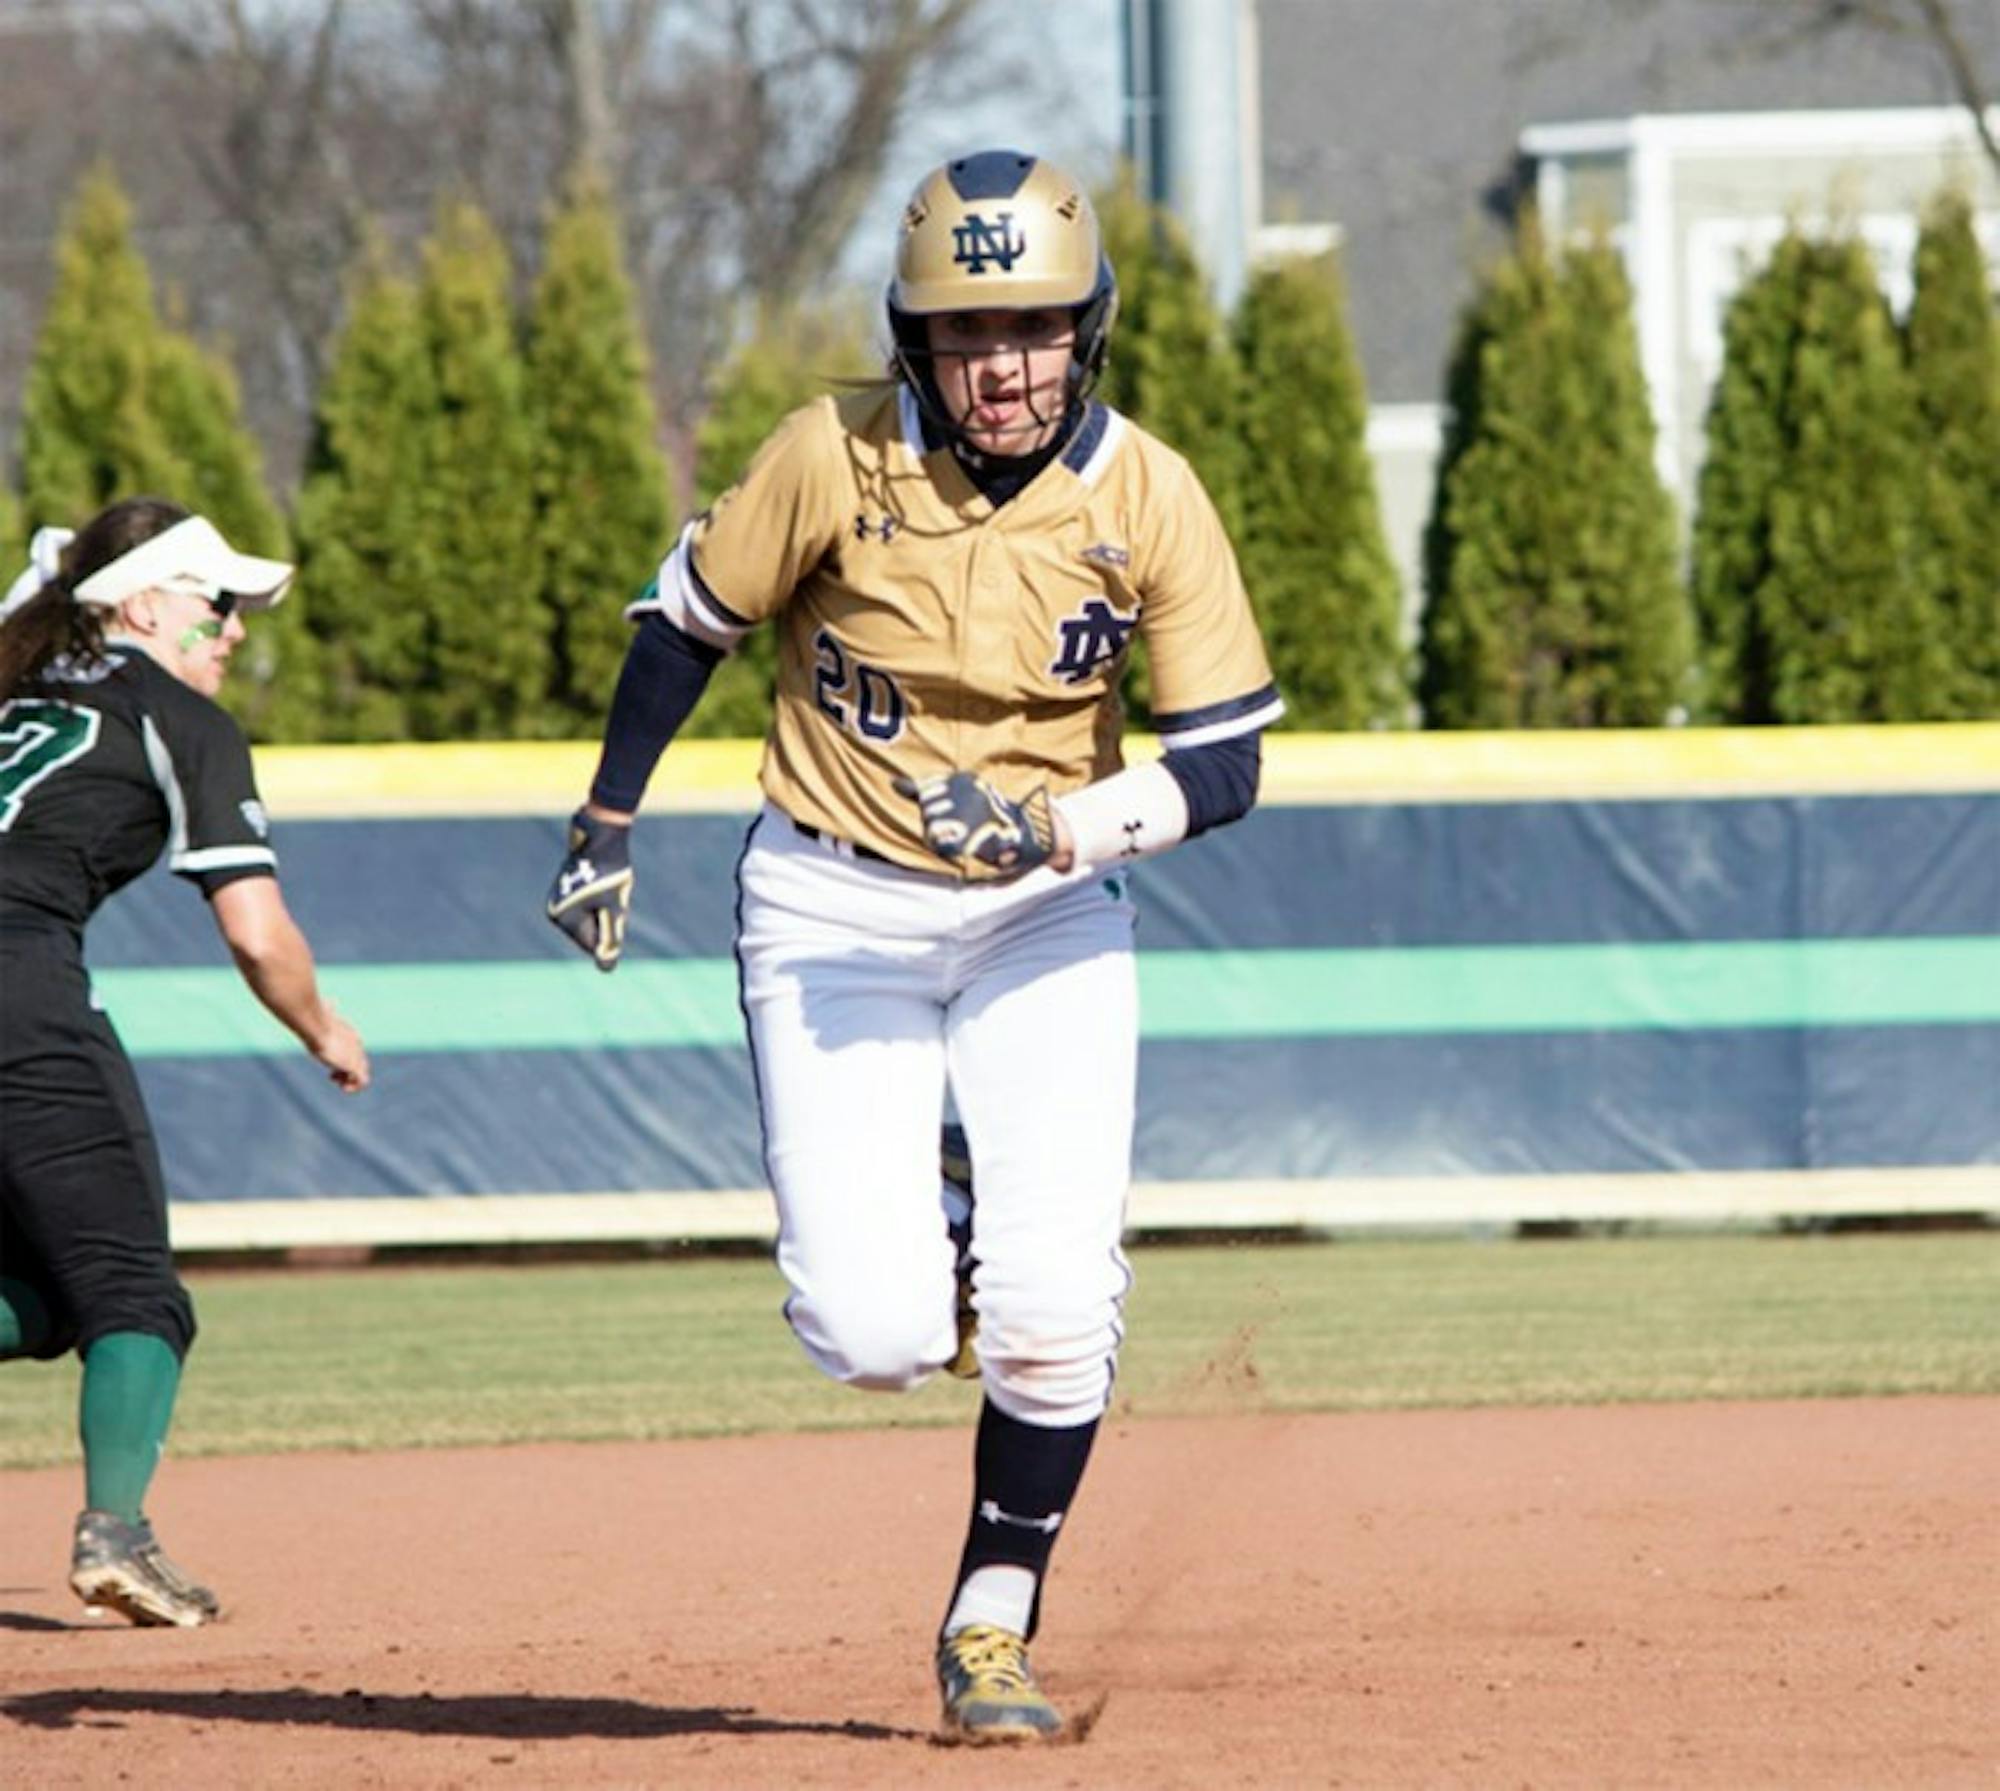 Irish junior infielder Morgan Reed sprints to third base during Notre Dame's 10-2 win over Eastern Michigan on March 22 at Melissa Cook Stadium.